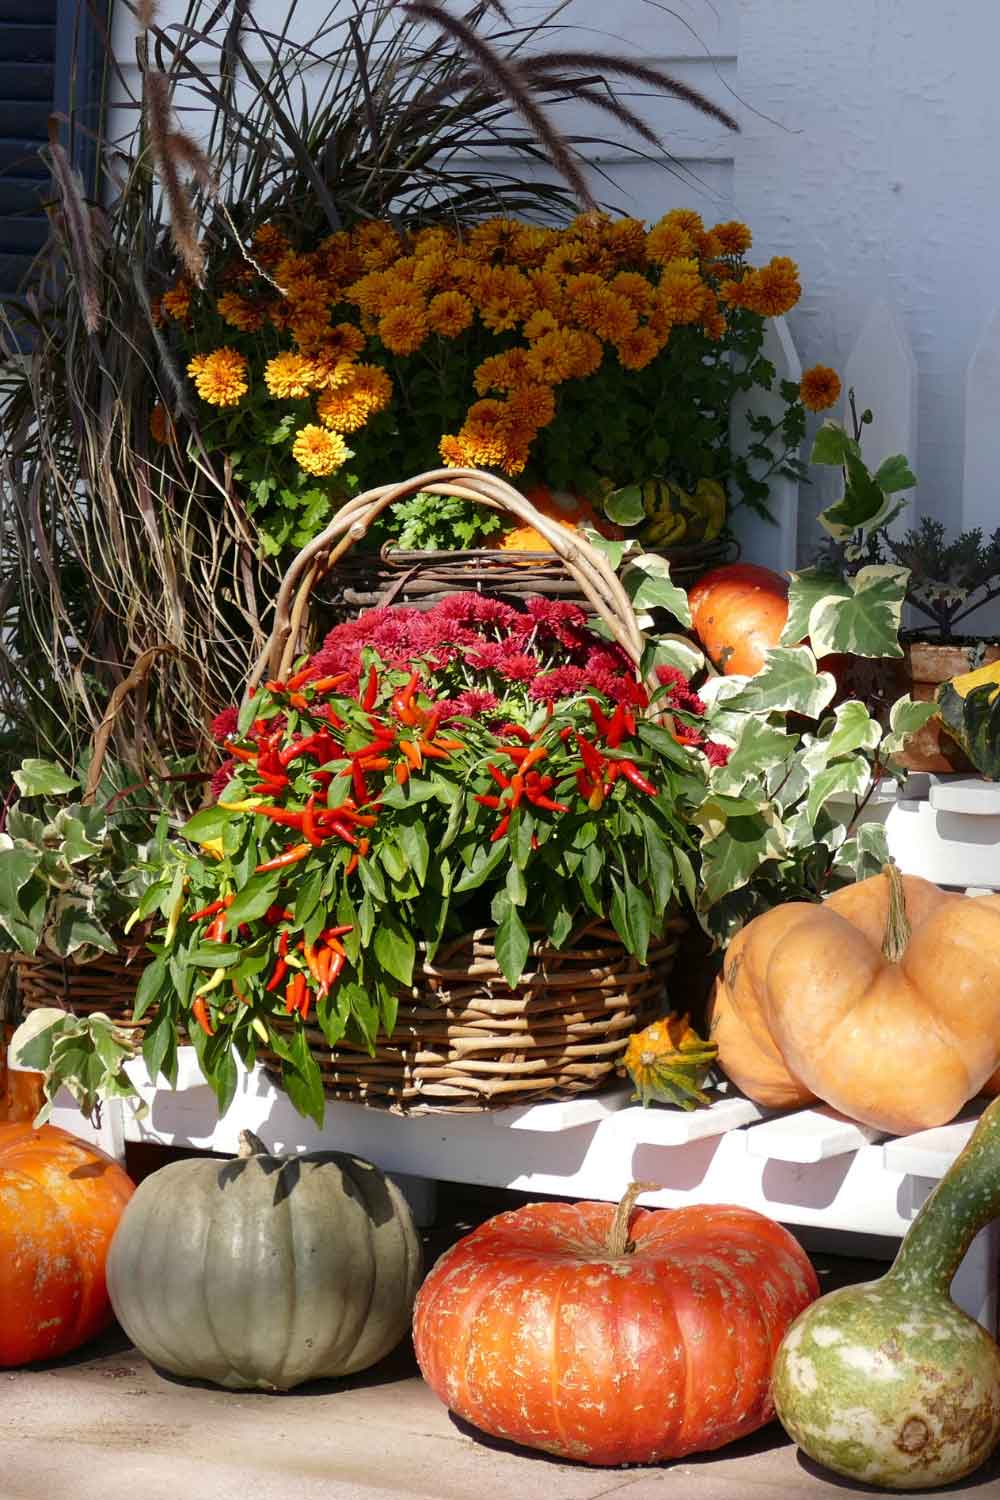 Spice up Your Fall Flower Display